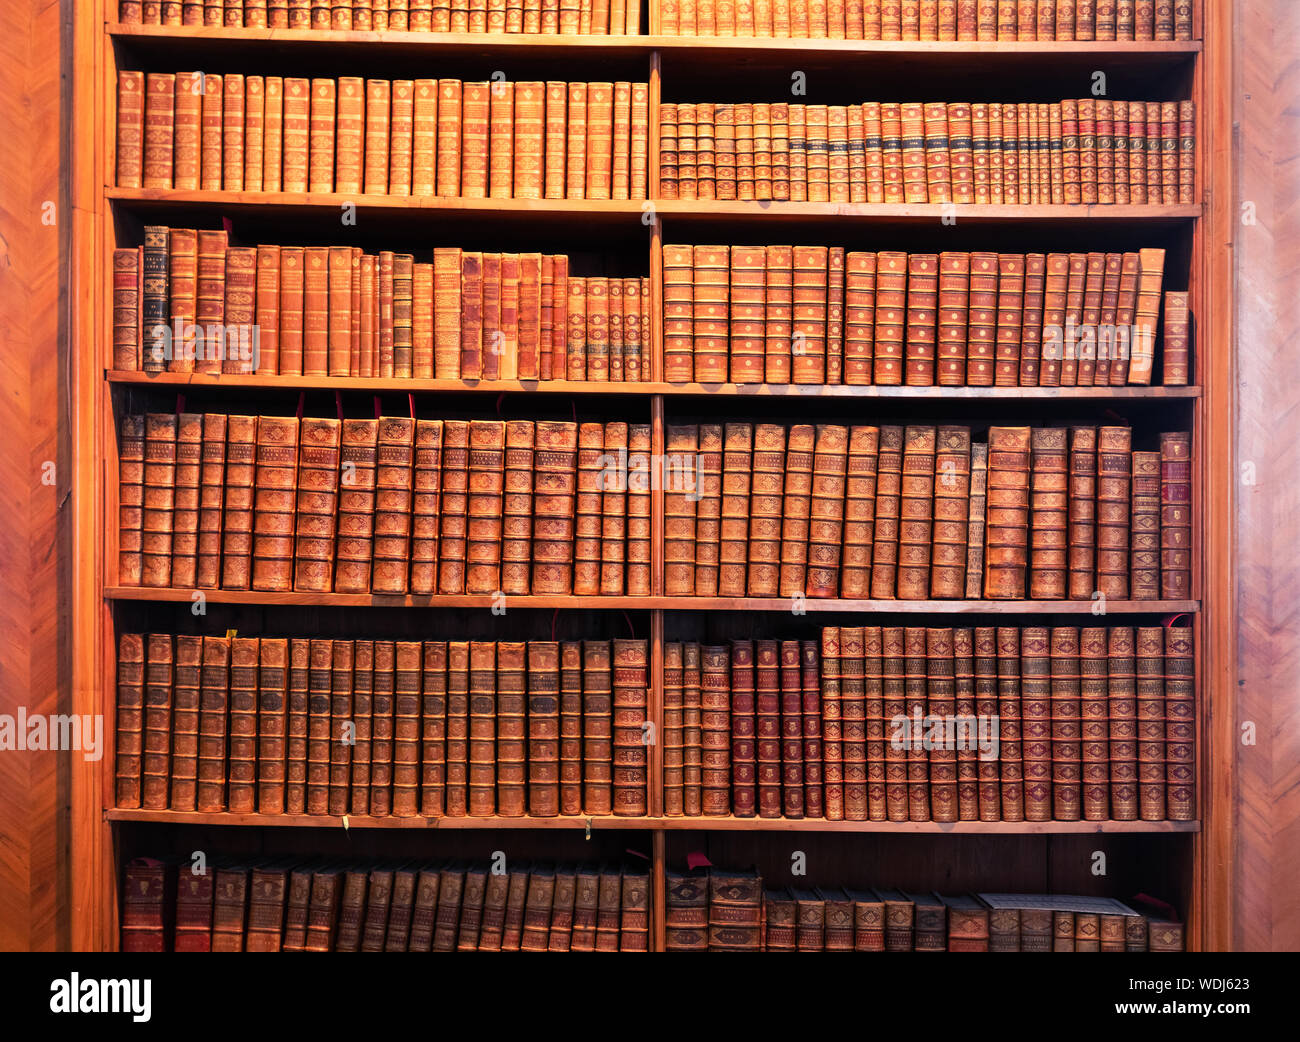 Old Books From The National Library Of Austria On The Shelves Of A